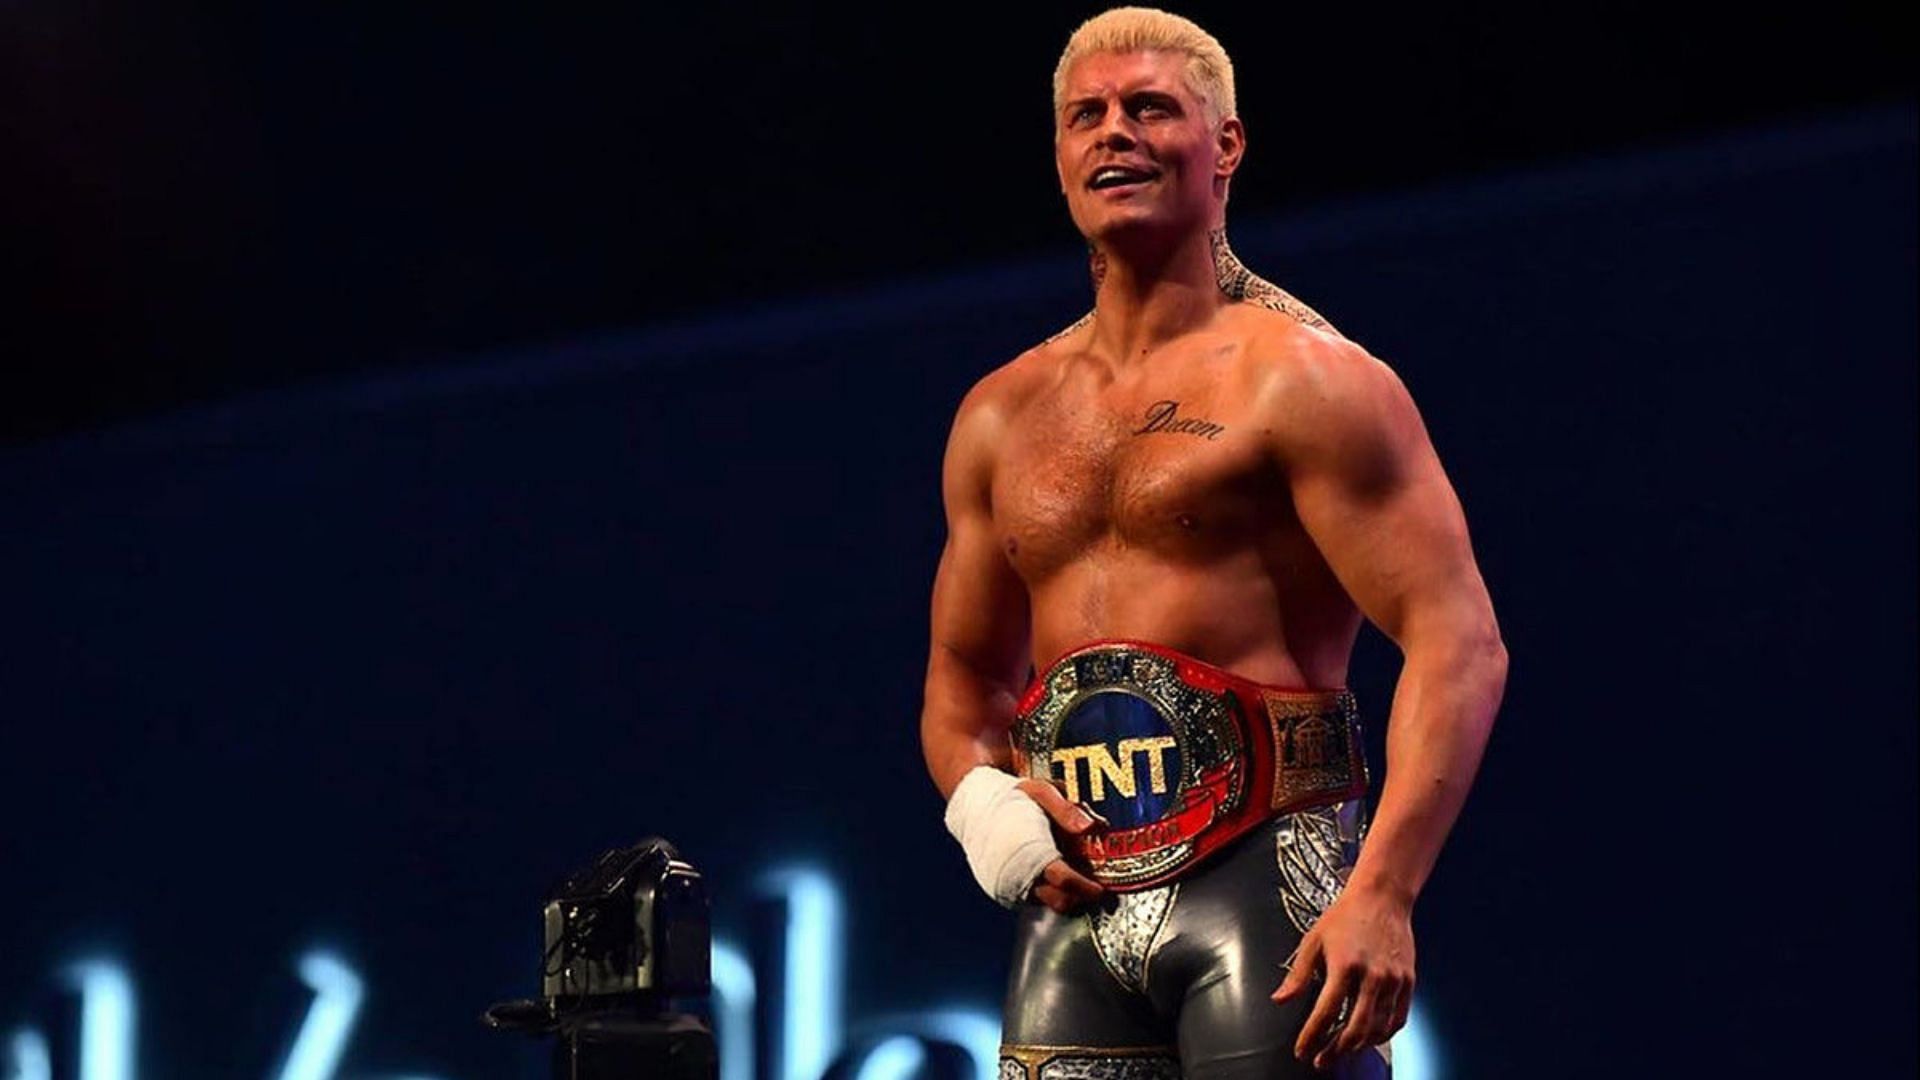 Cody Rhodes with the AEW TNT Championship